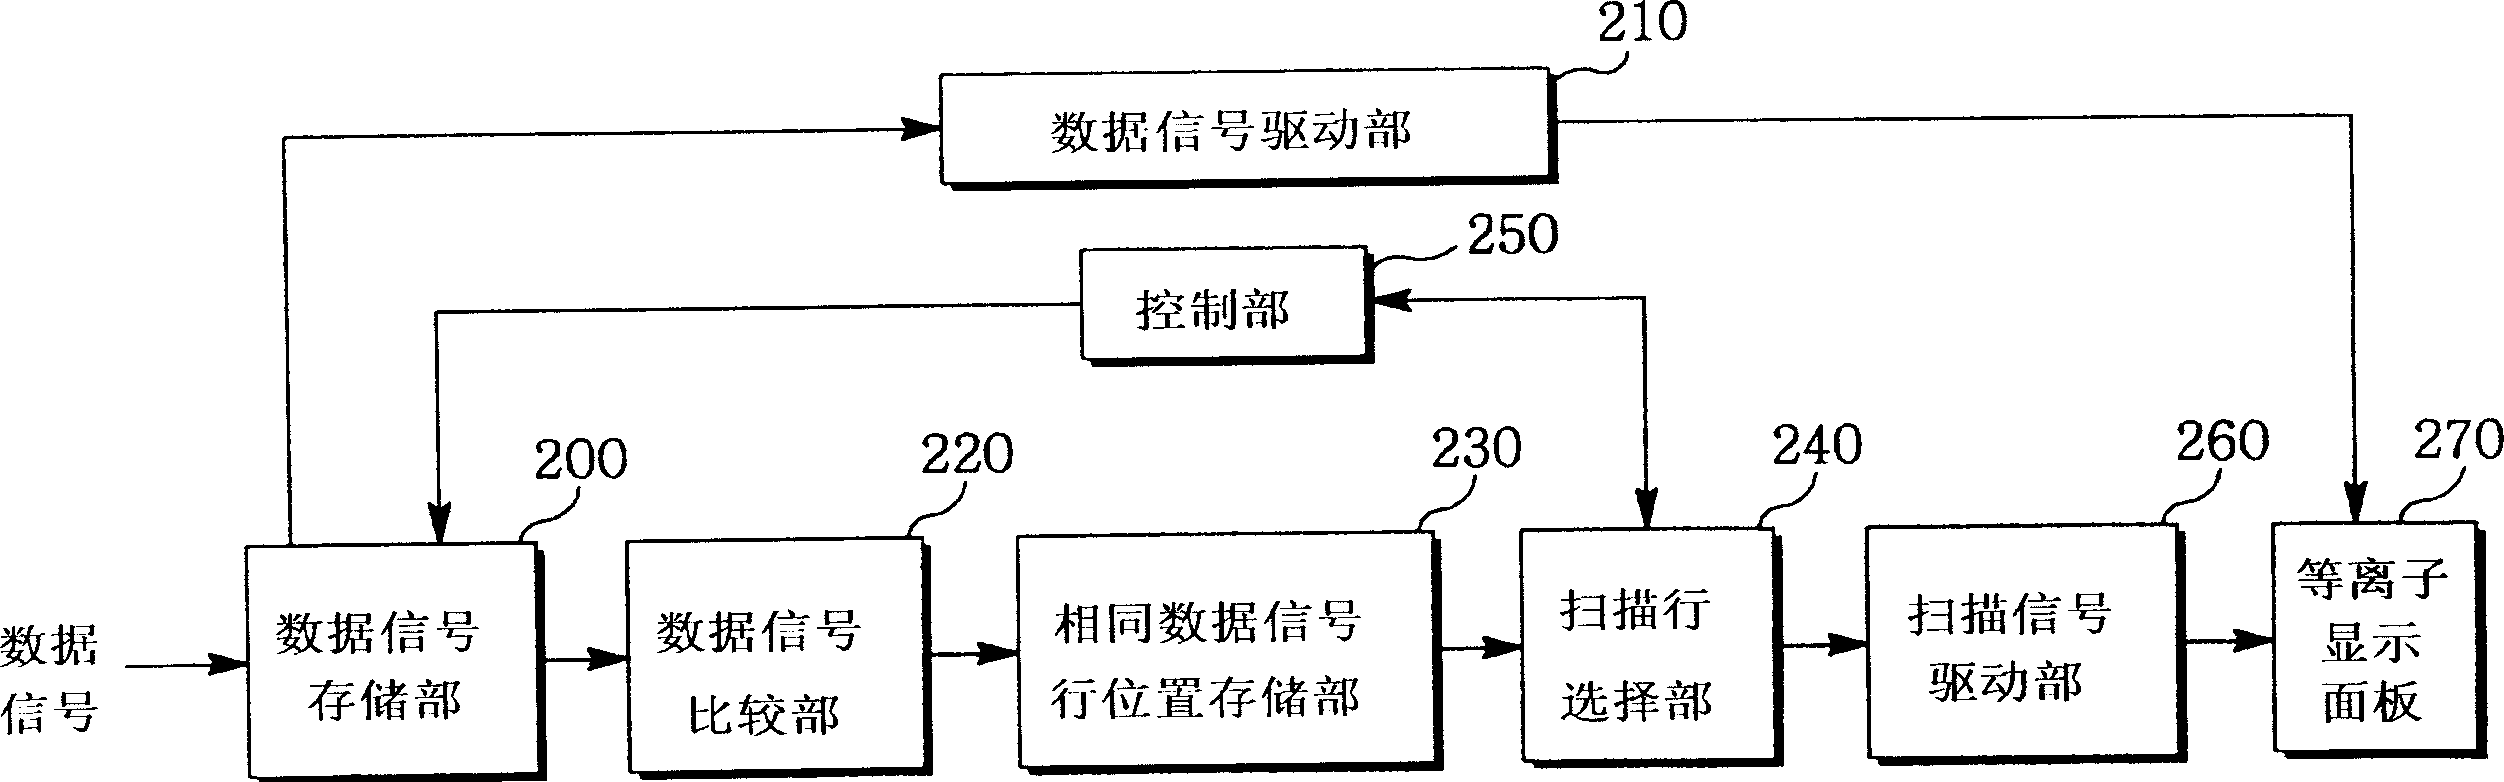 Multi-scan device and multi-scan method for plasma display panel